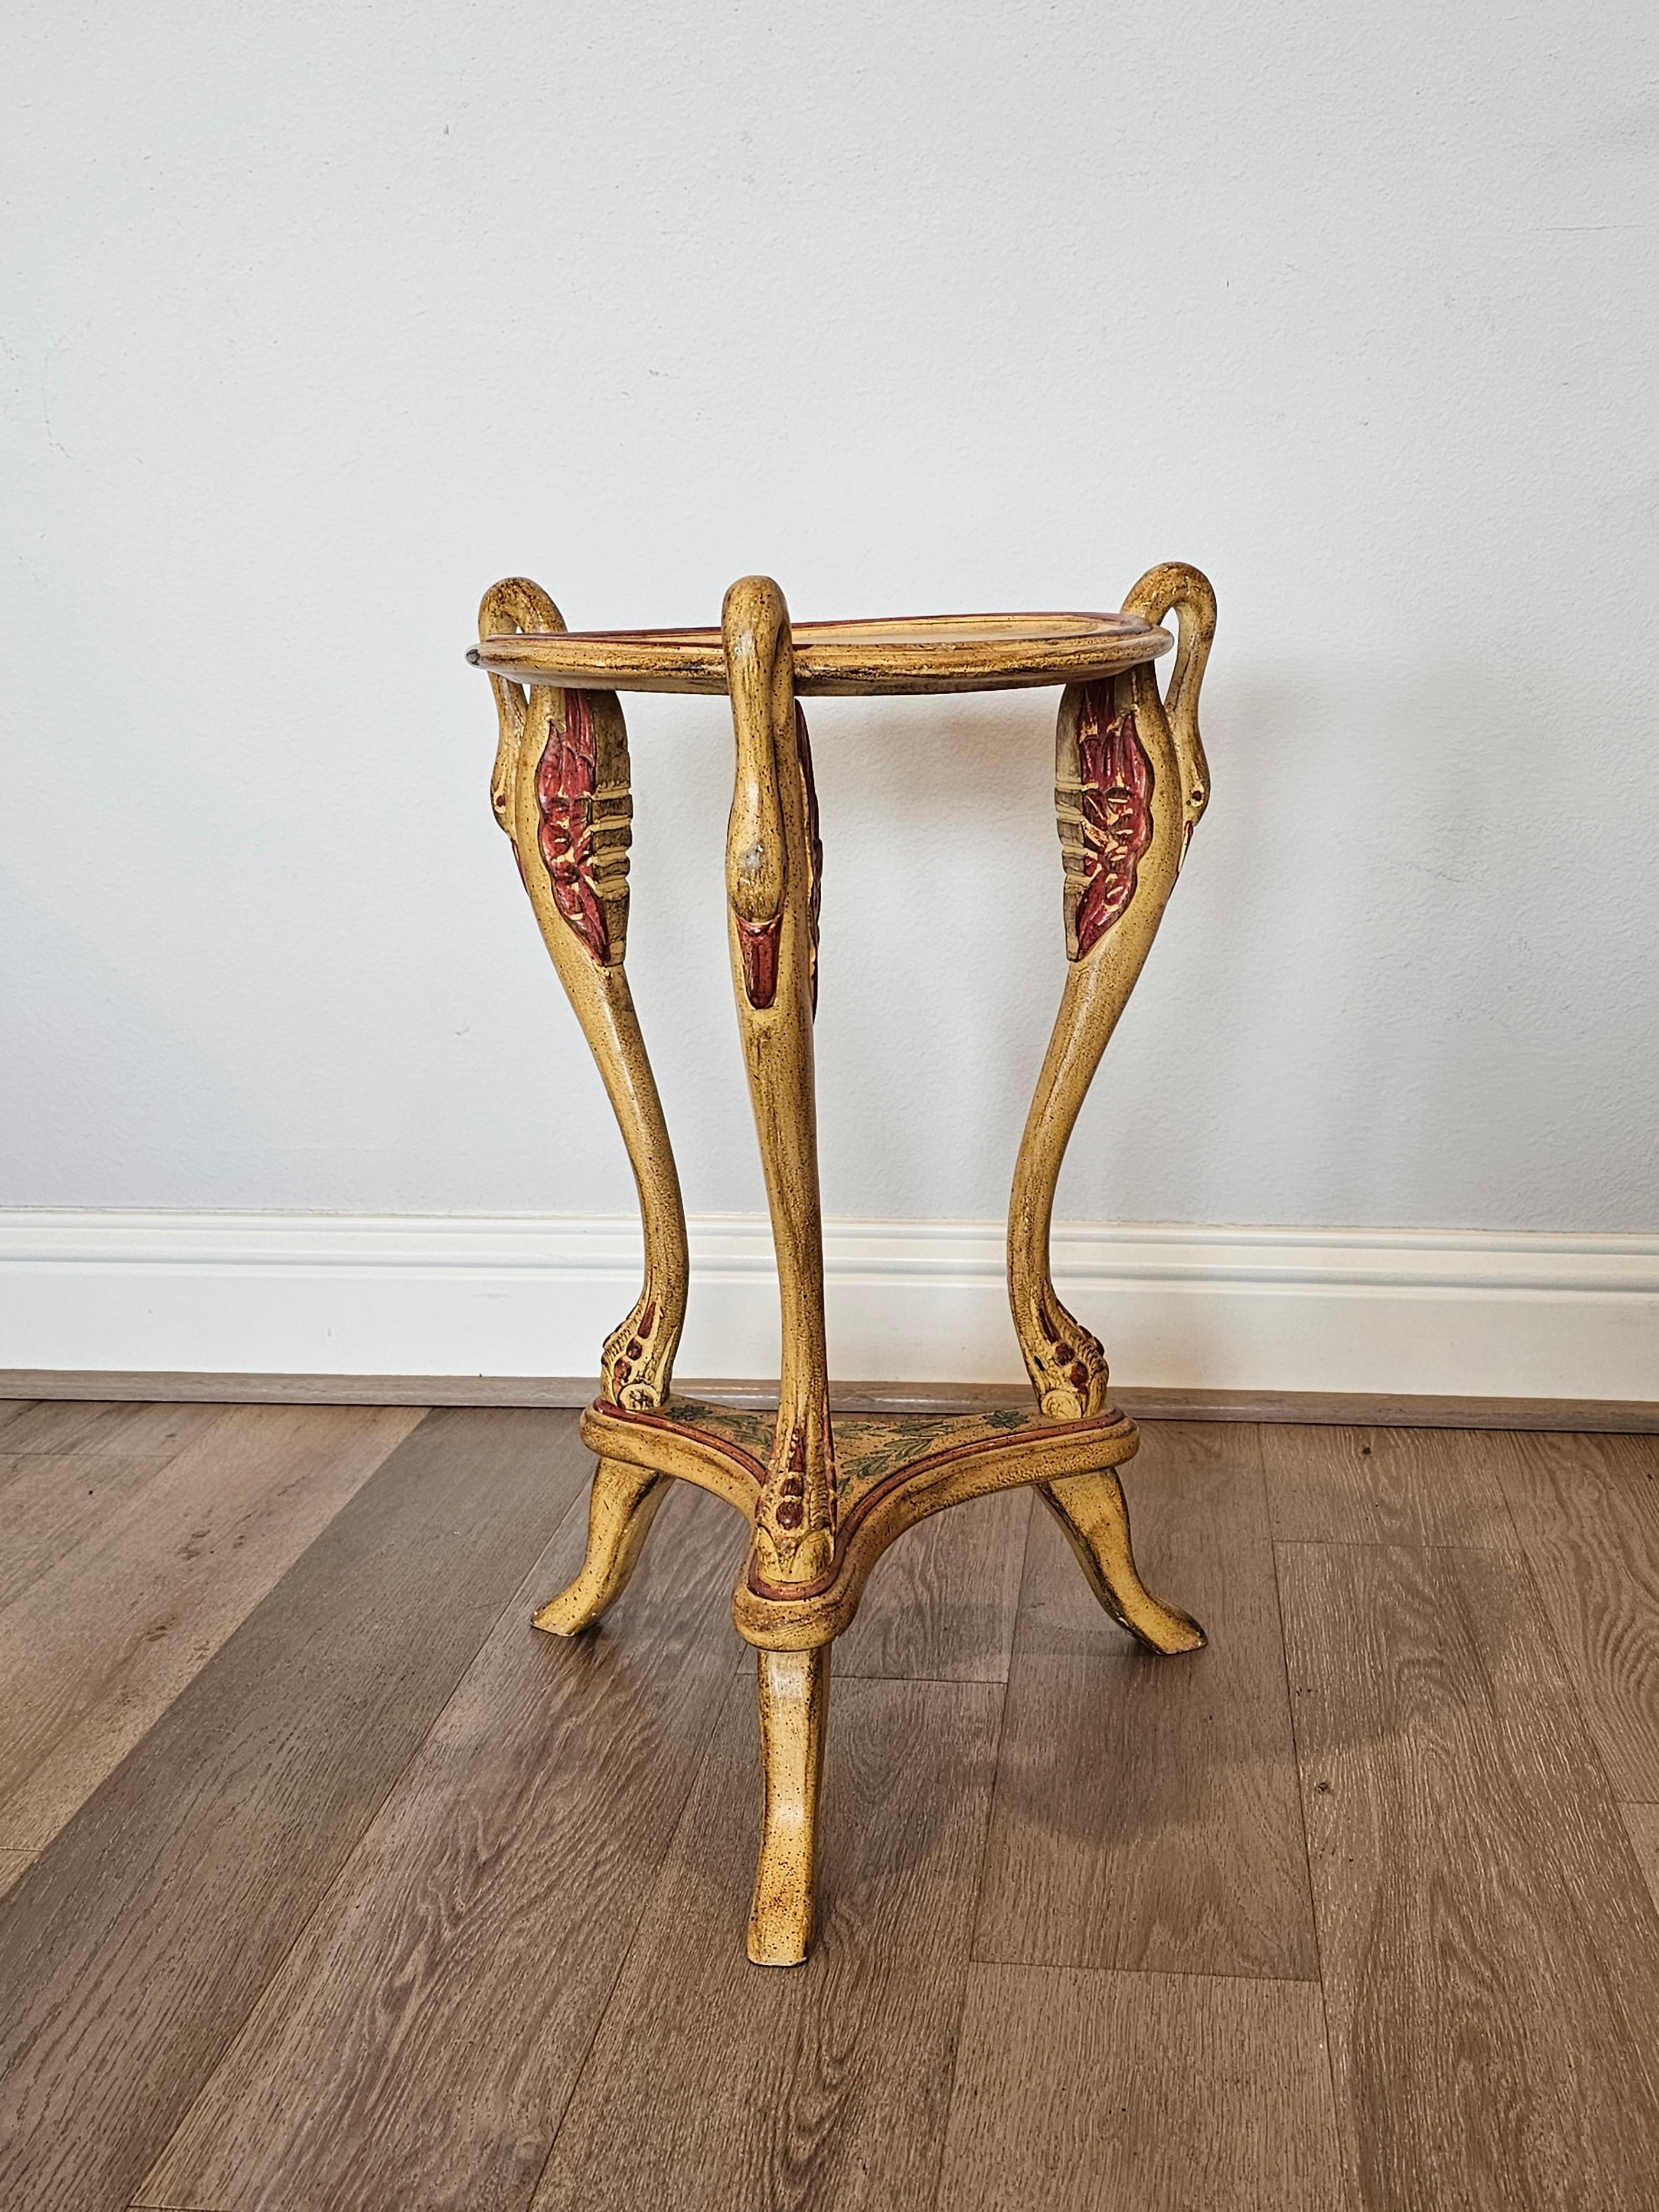 Vintage Neoclassical Revival Painted Swan Guéridon Table For Sale 1